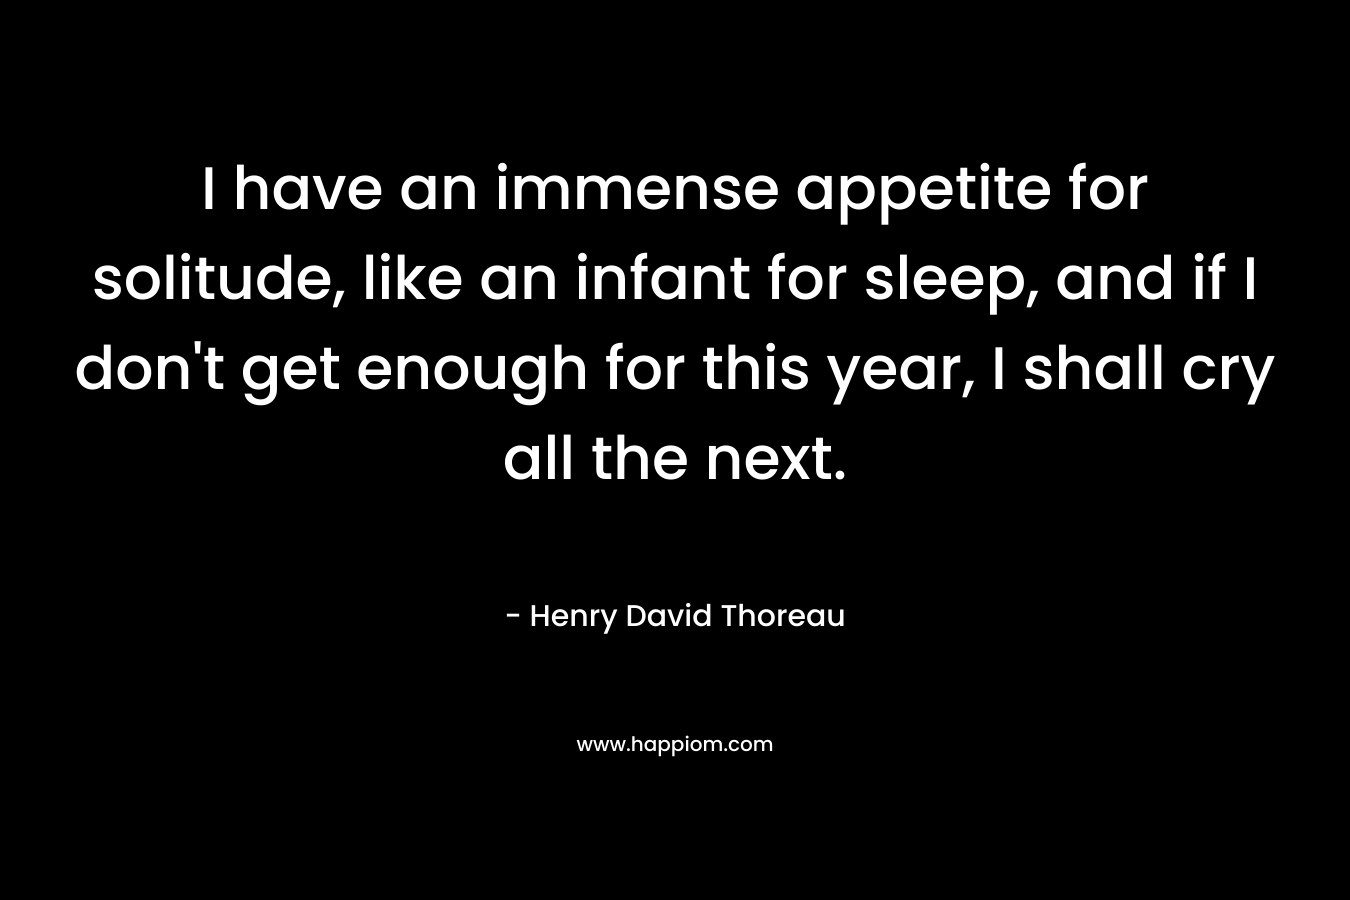 I have an immense appetite for solitude, like an infant for sleep, and if I don’t get enough for this year, I shall cry all the next.  – Henry David Thoreau